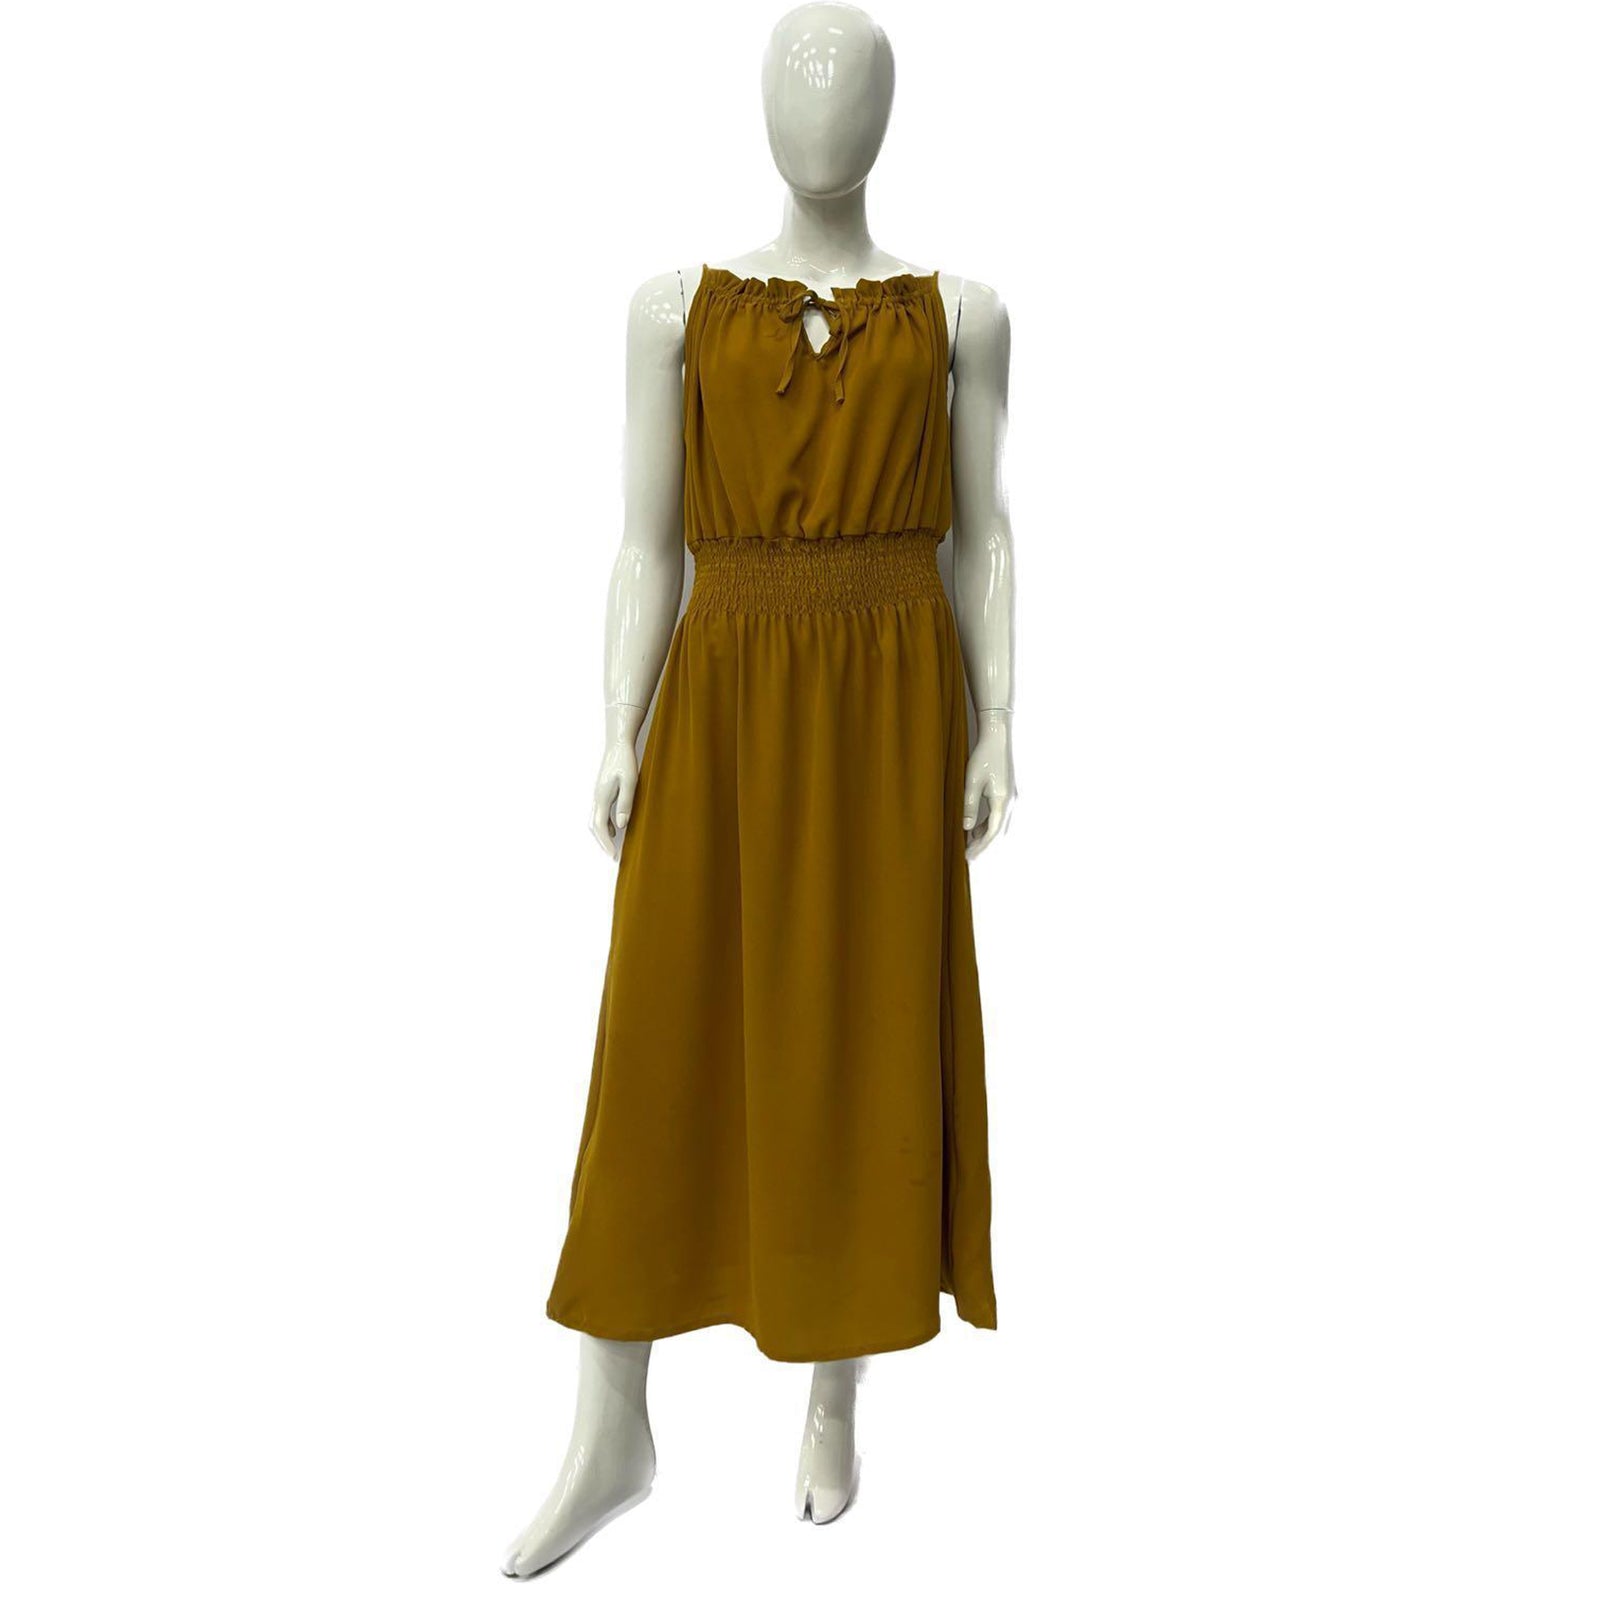 Wholesale Women's Dresses Woven Solid Air Flow Spg Smk Waist Maxi Dress -Mustard 6-36-Case S-XL Ivory NW44